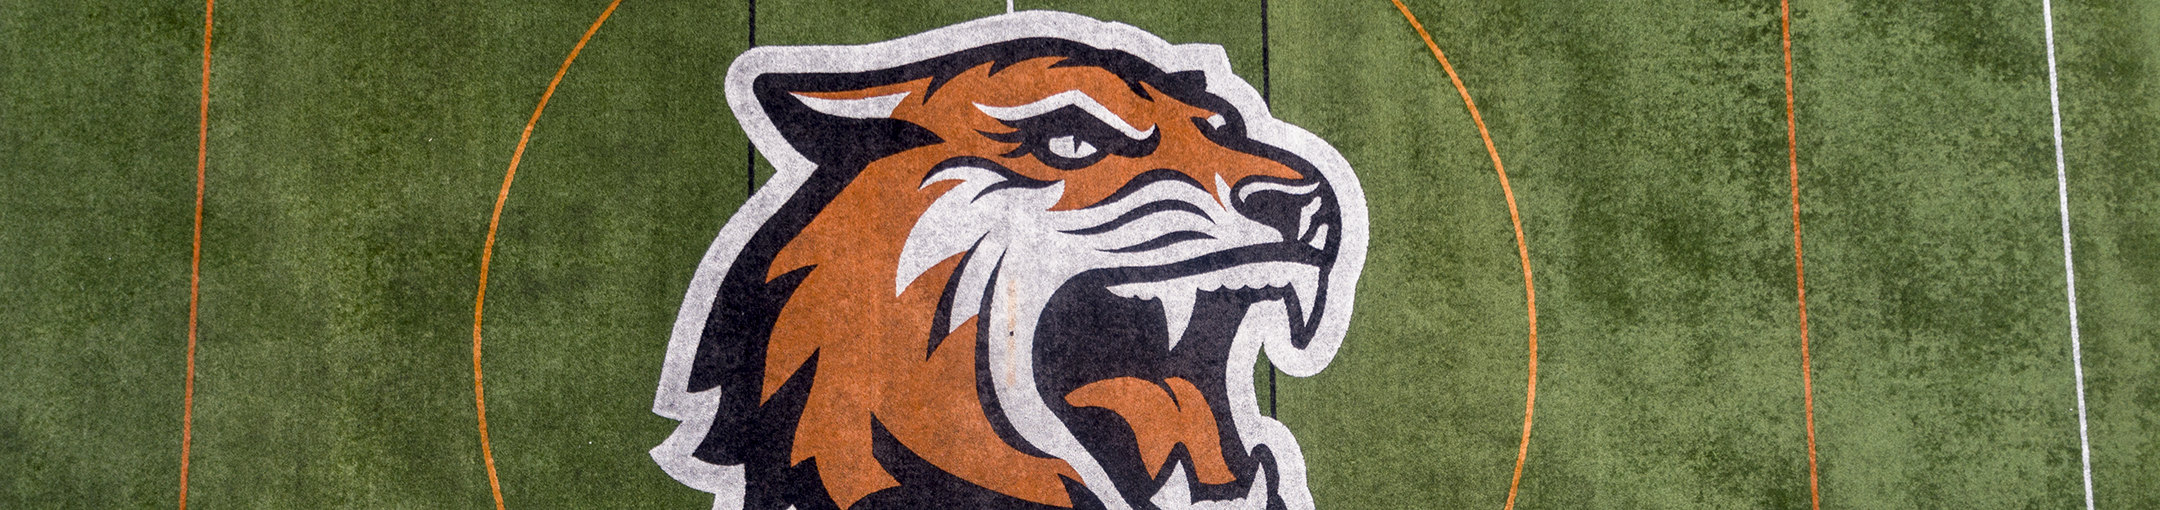 a tiger logo in the middle of a turf field